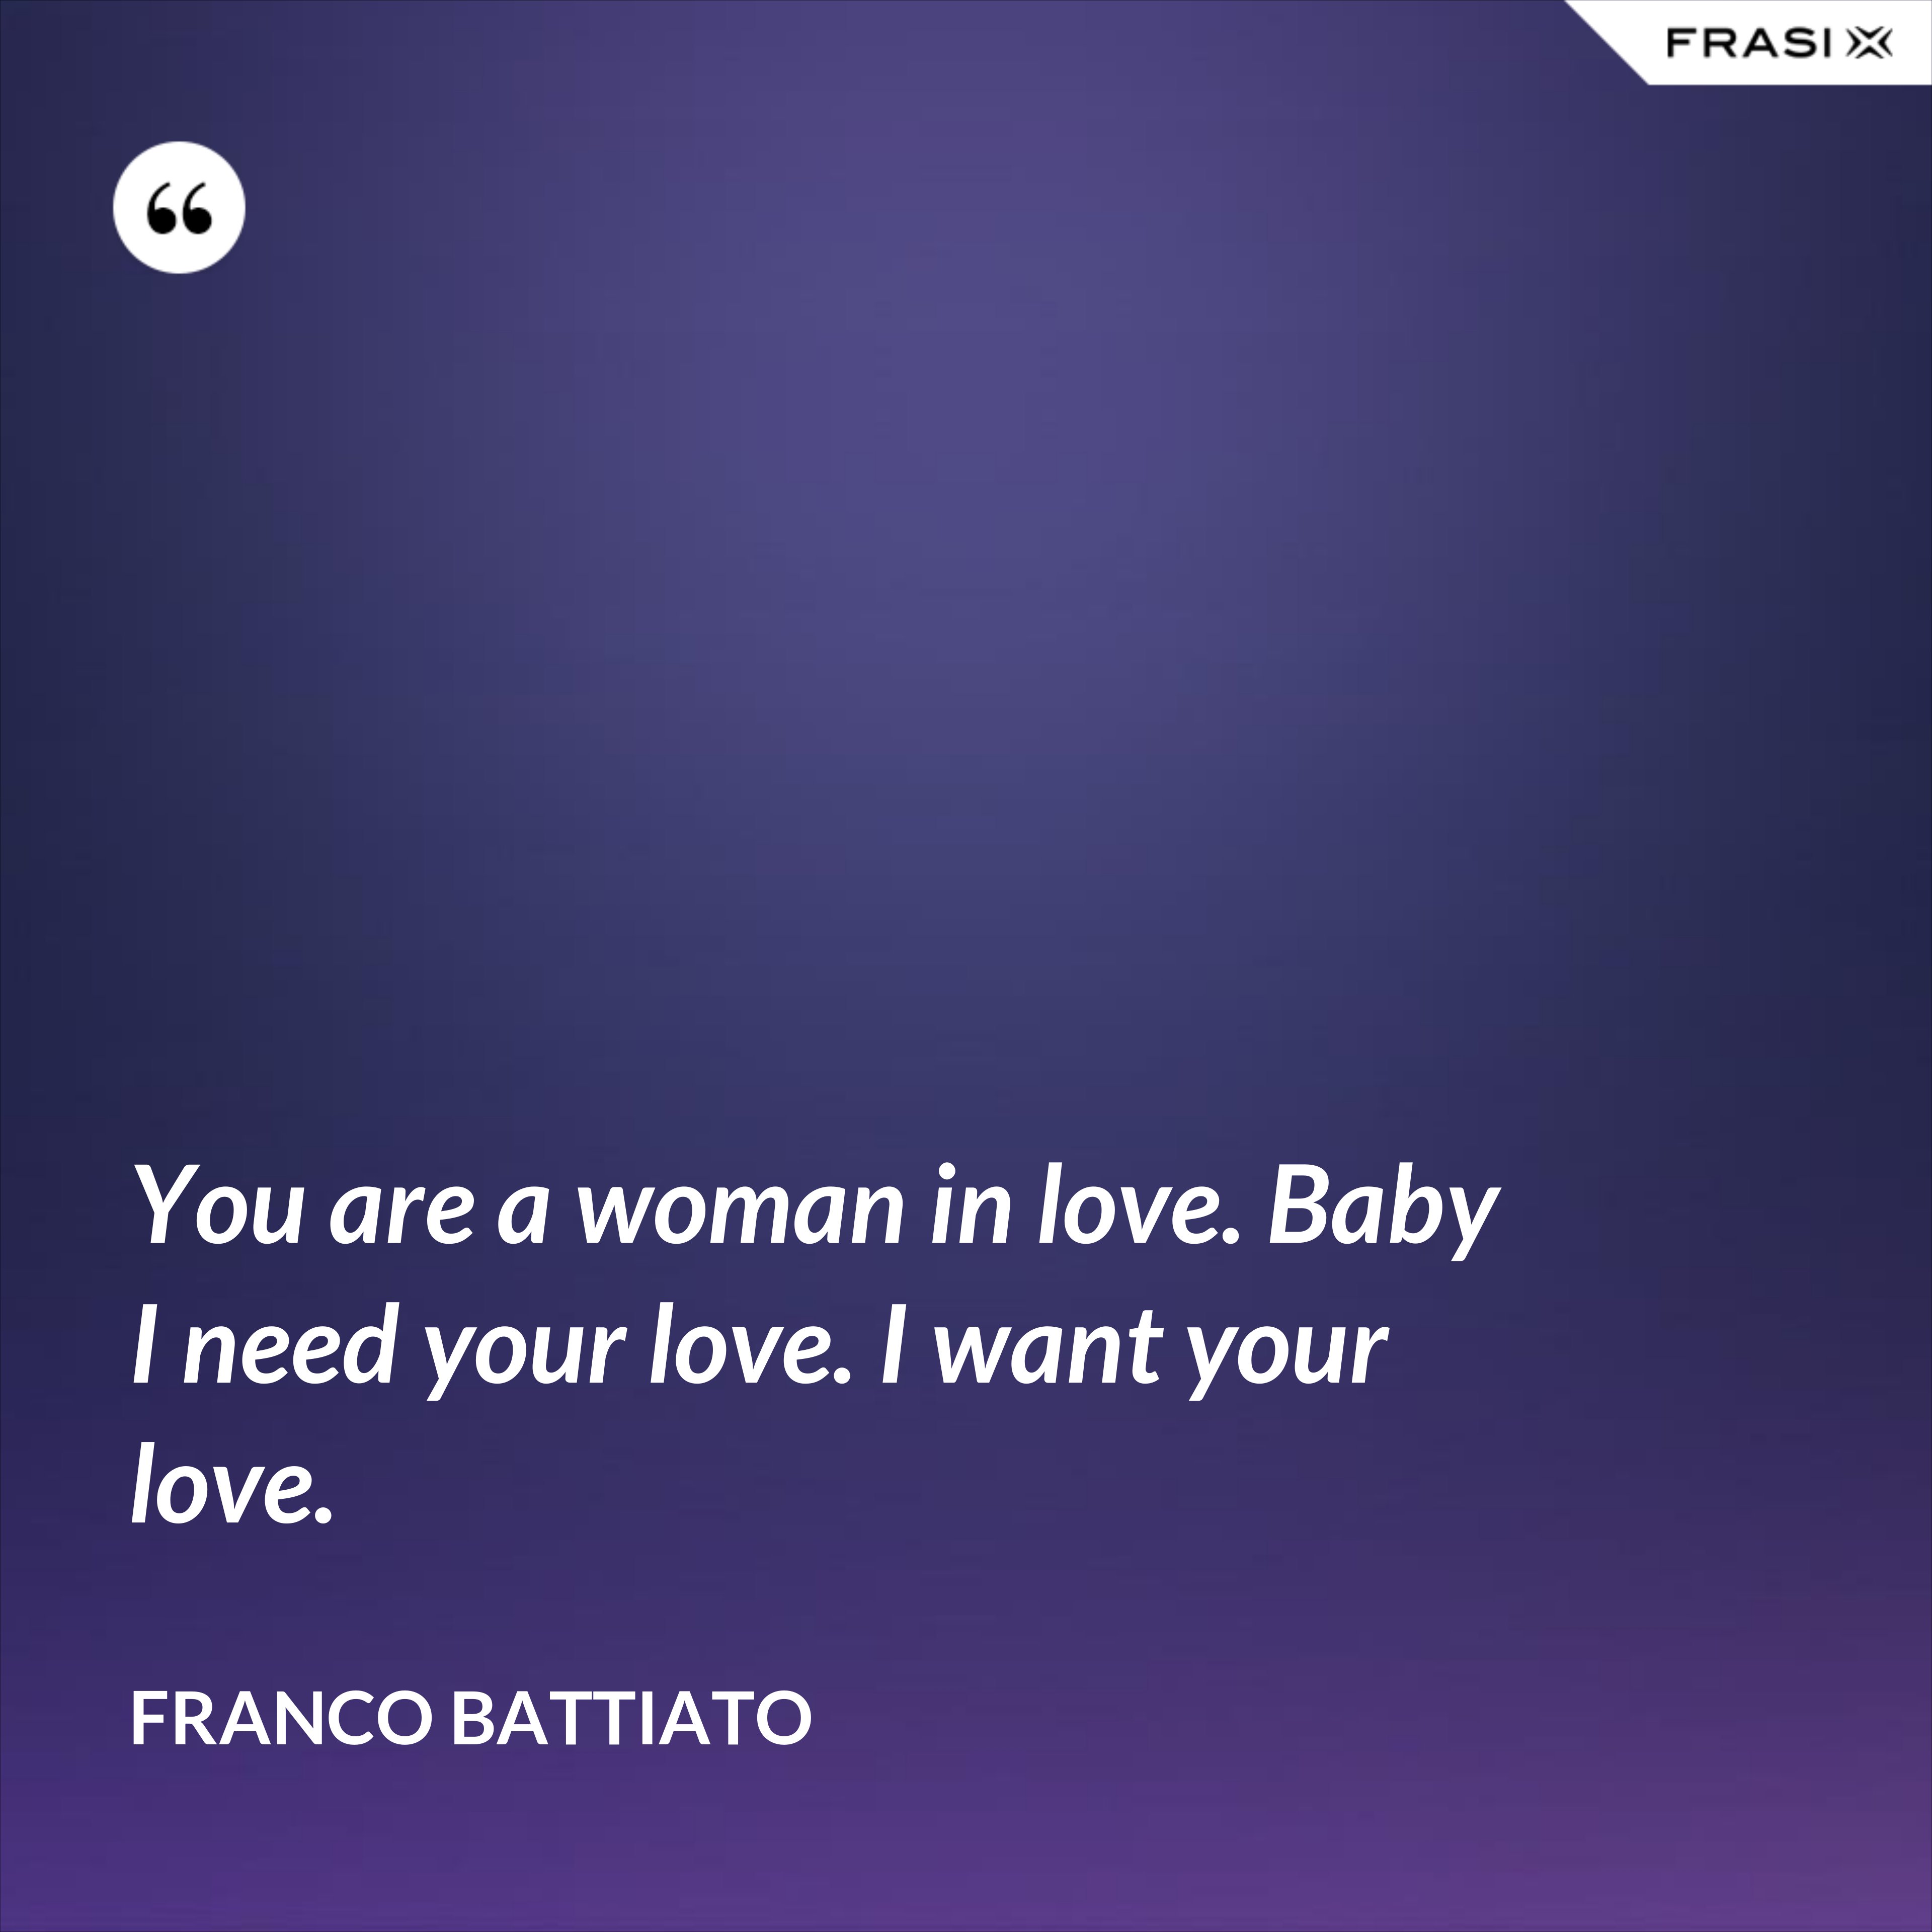 You are a woman in love. Baby I need your love. I want your love. - Franco Battiato